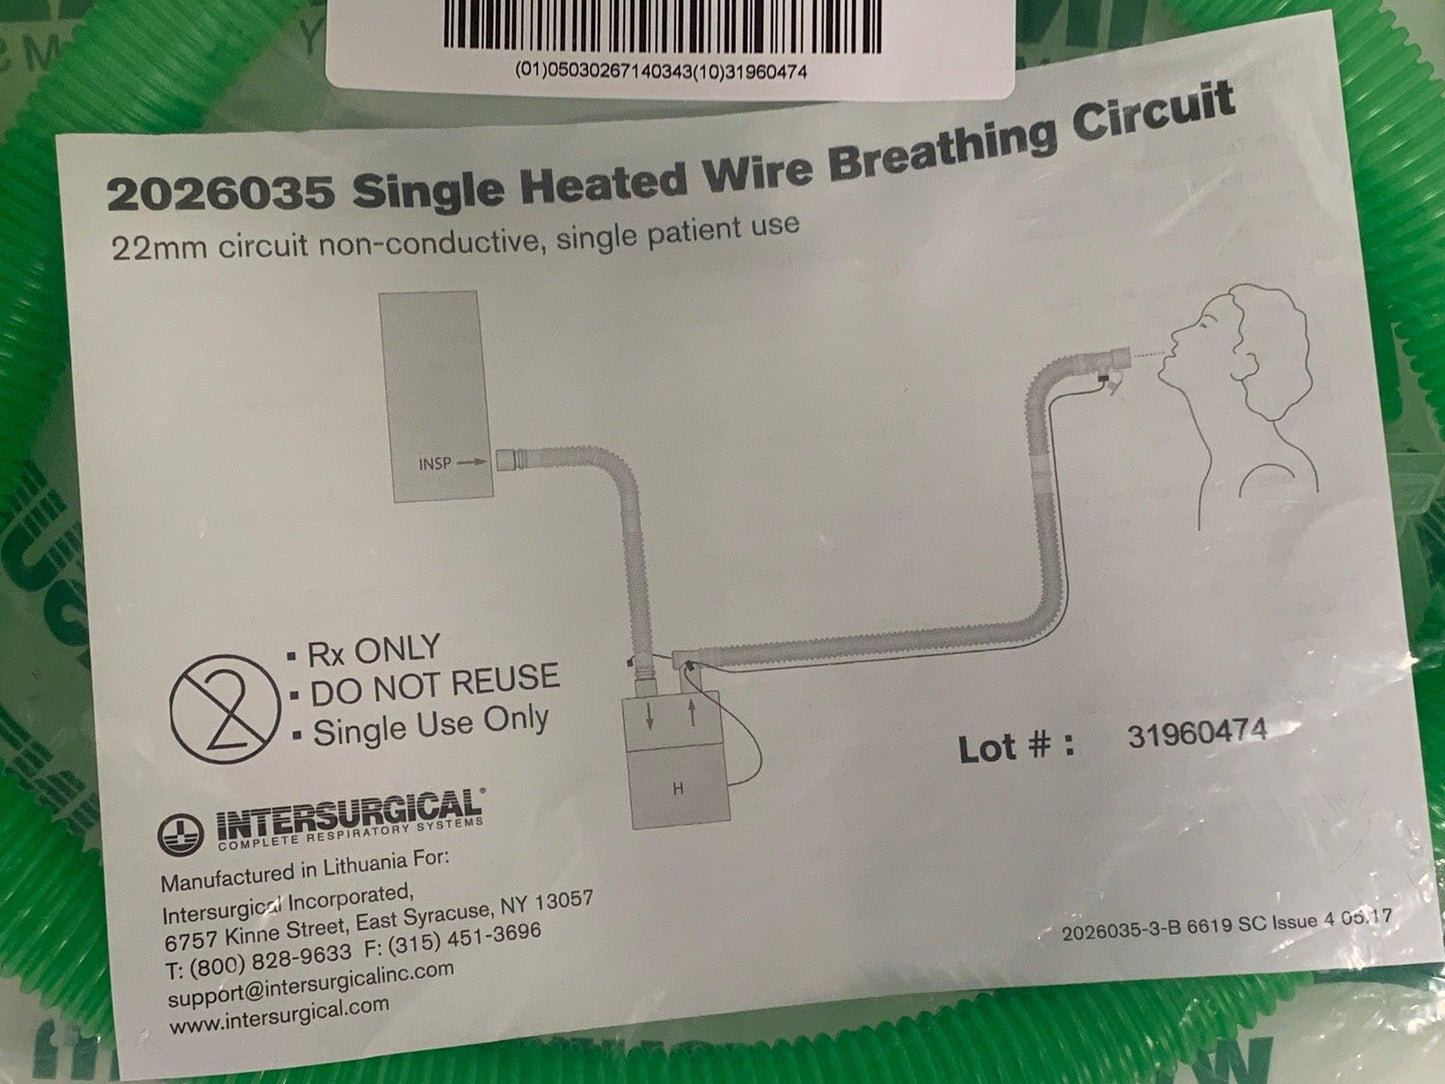 NEW Each Intersurgical Flextube 22mm Single Heated Wire Breathing System 2026035 - MBR Medicals